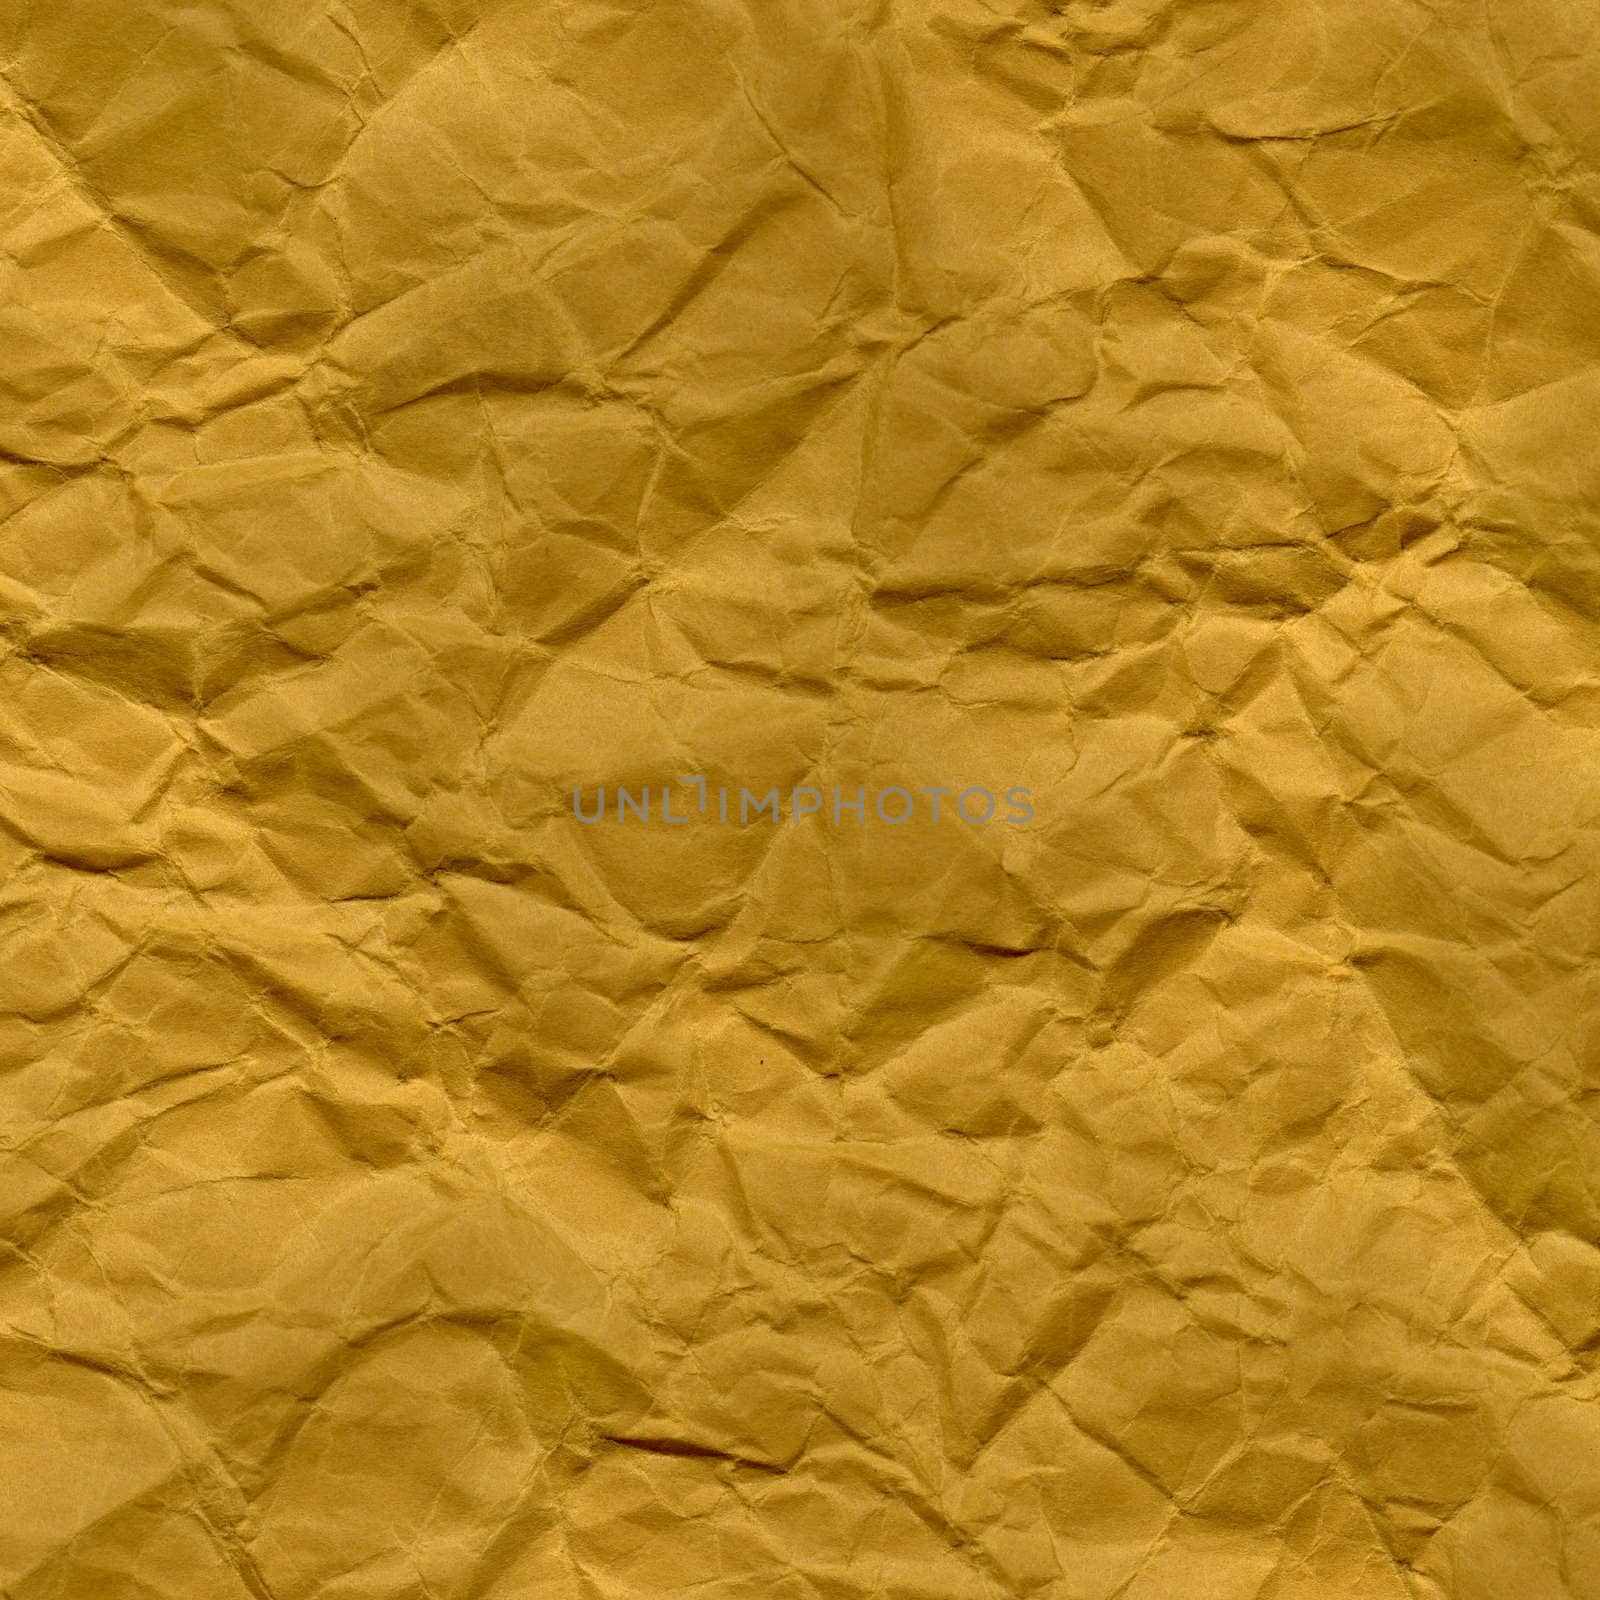 crumpled packing paper texture by PixelsAway